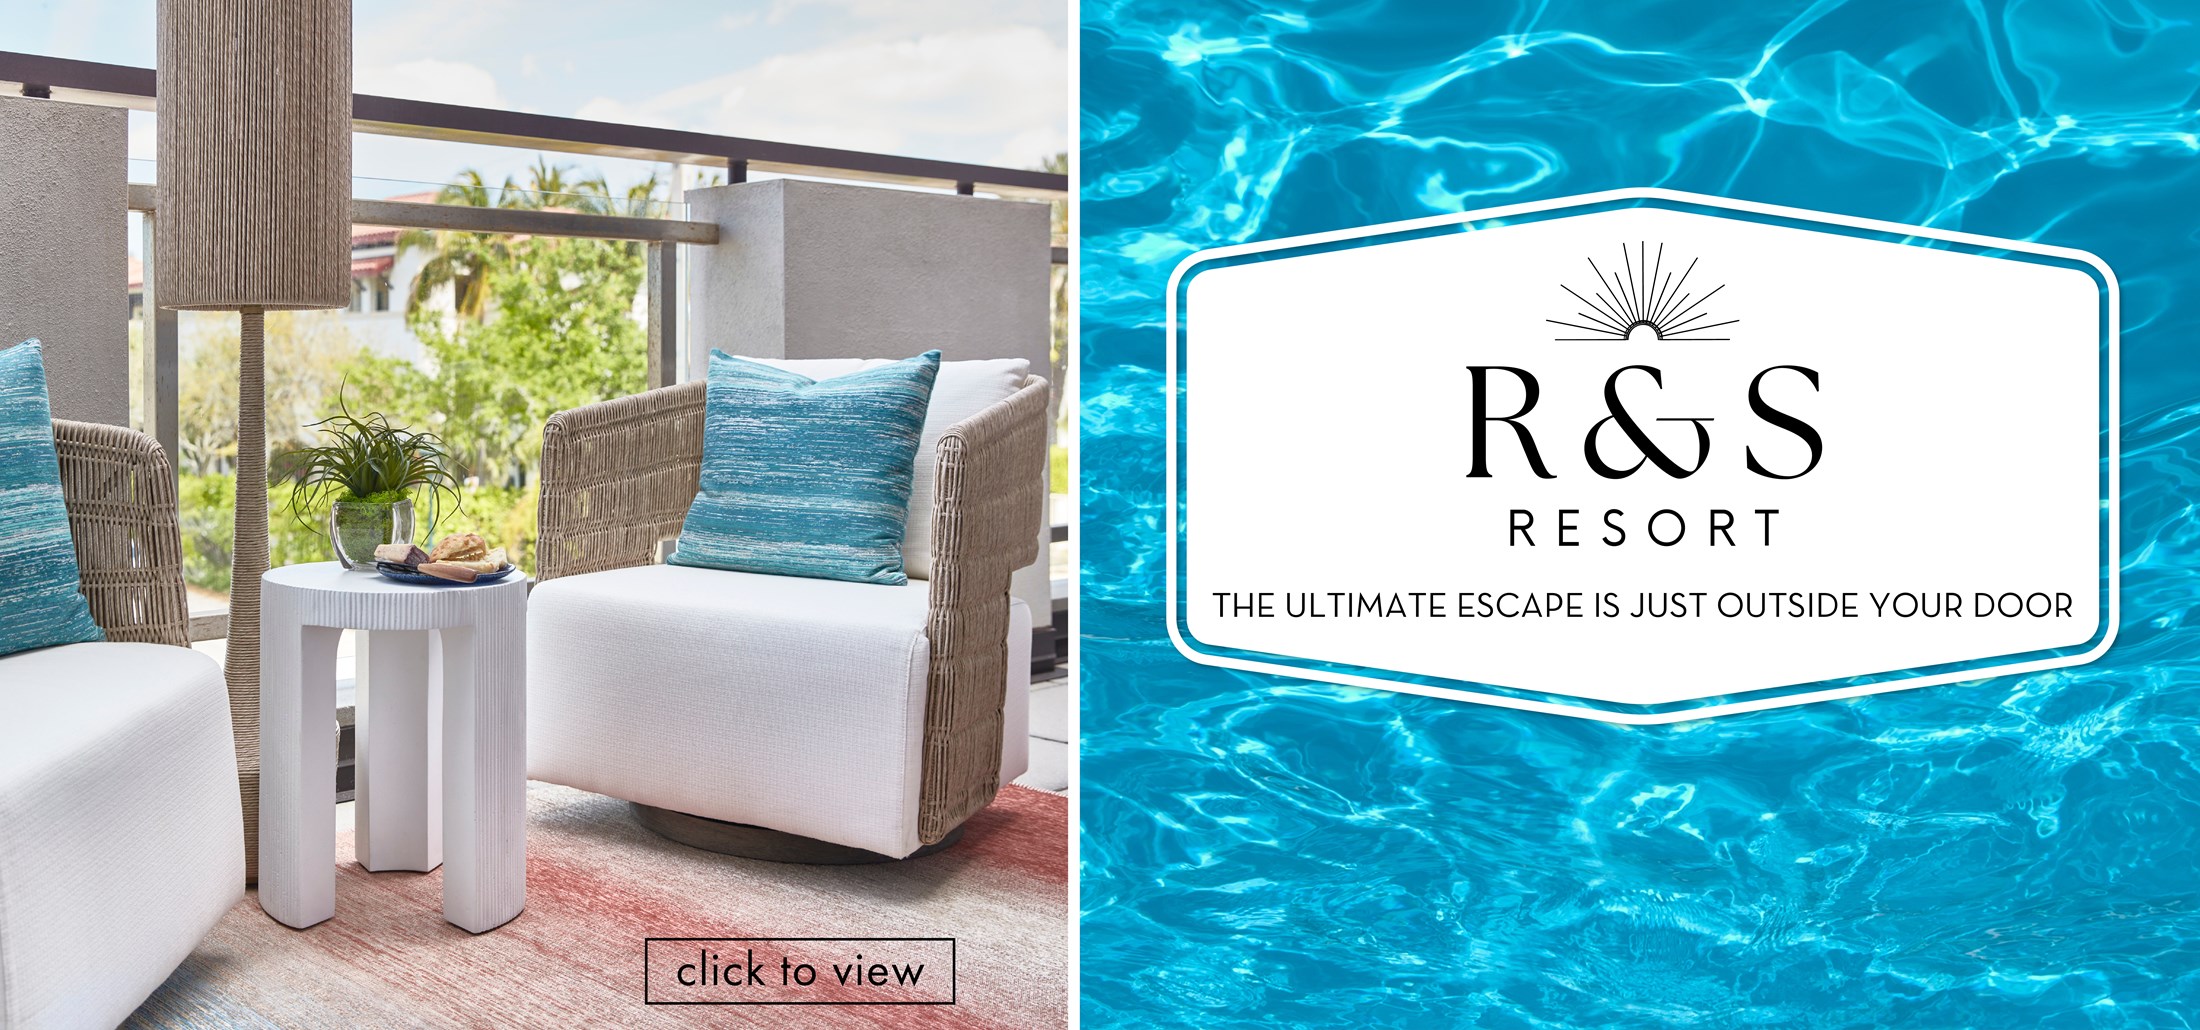 Image of outdoor chairs on a rug outdoors with a side table and lamp. Text: R&S Resort. The Ultimate Escape Is Just Outside Your Door.